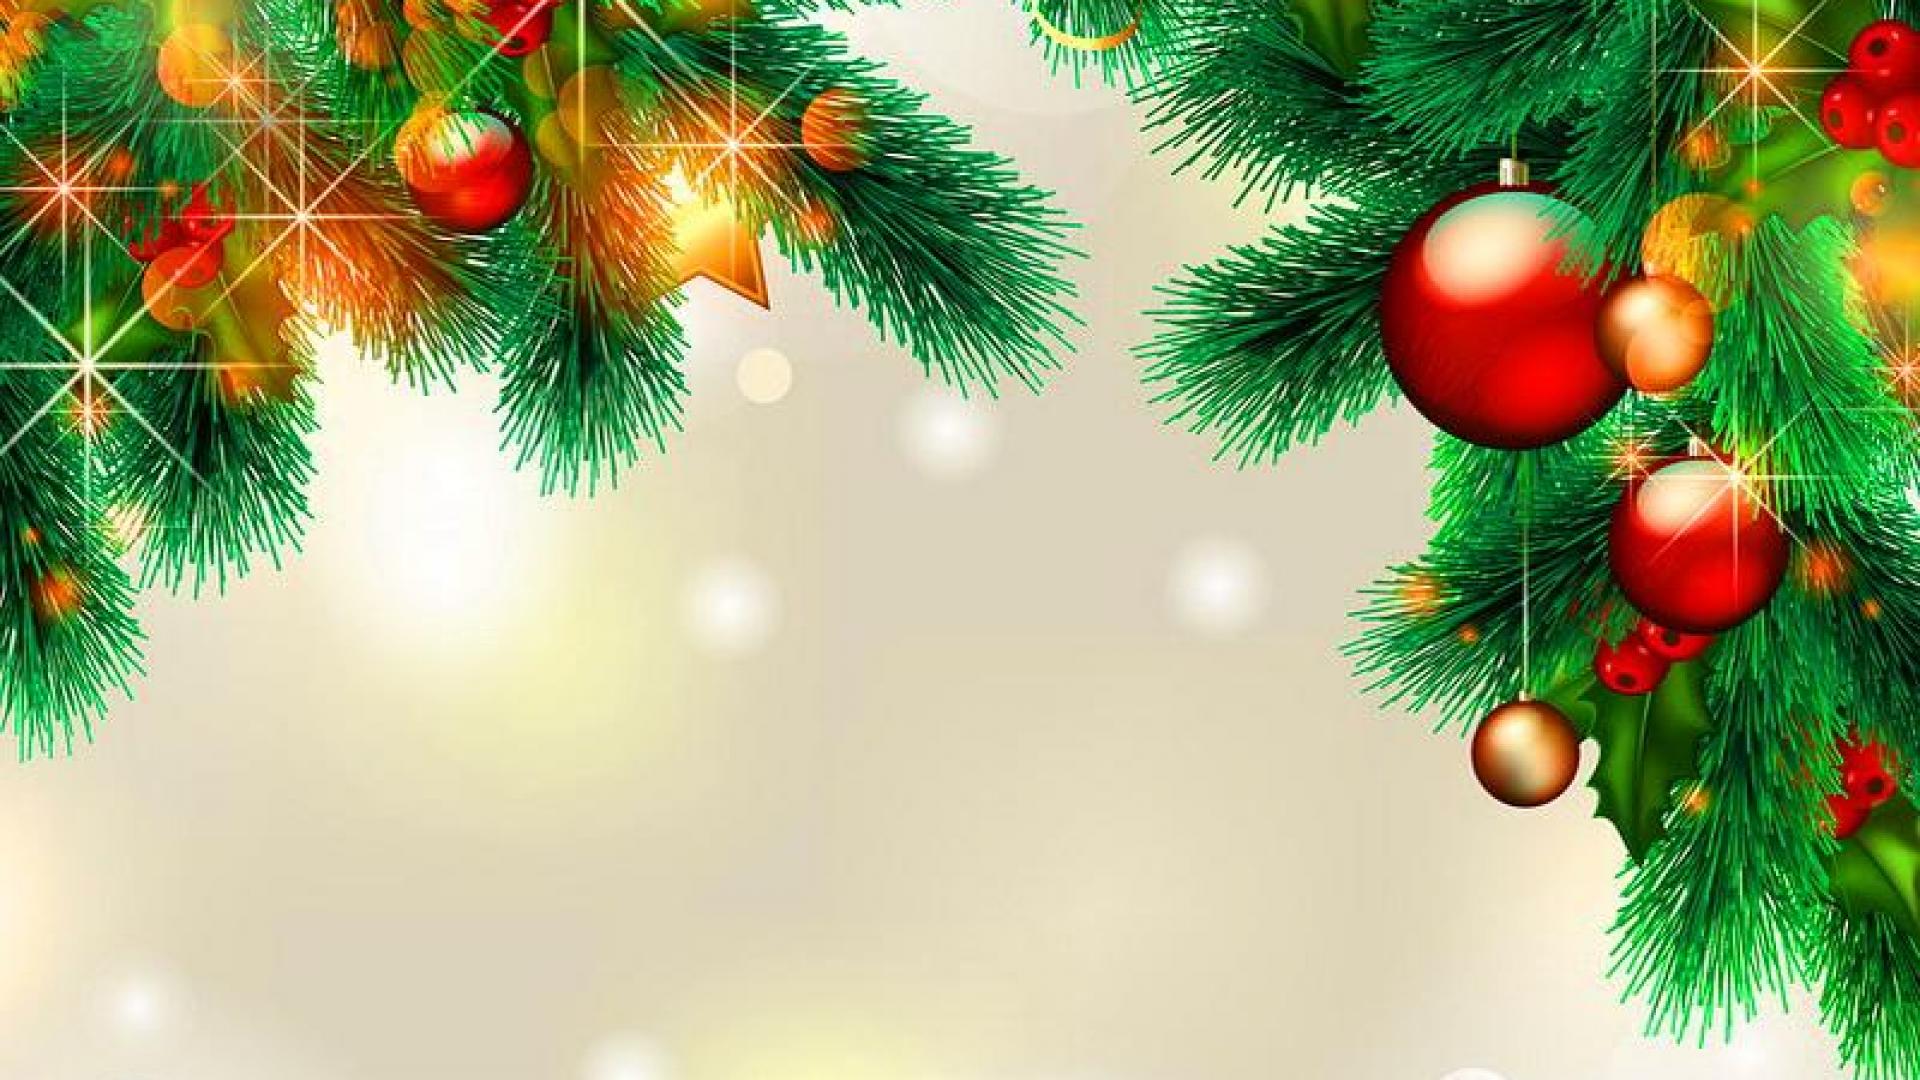 Free Christmas Background Image, Download Free Clip Art, Free Clip Art on Clipart Library